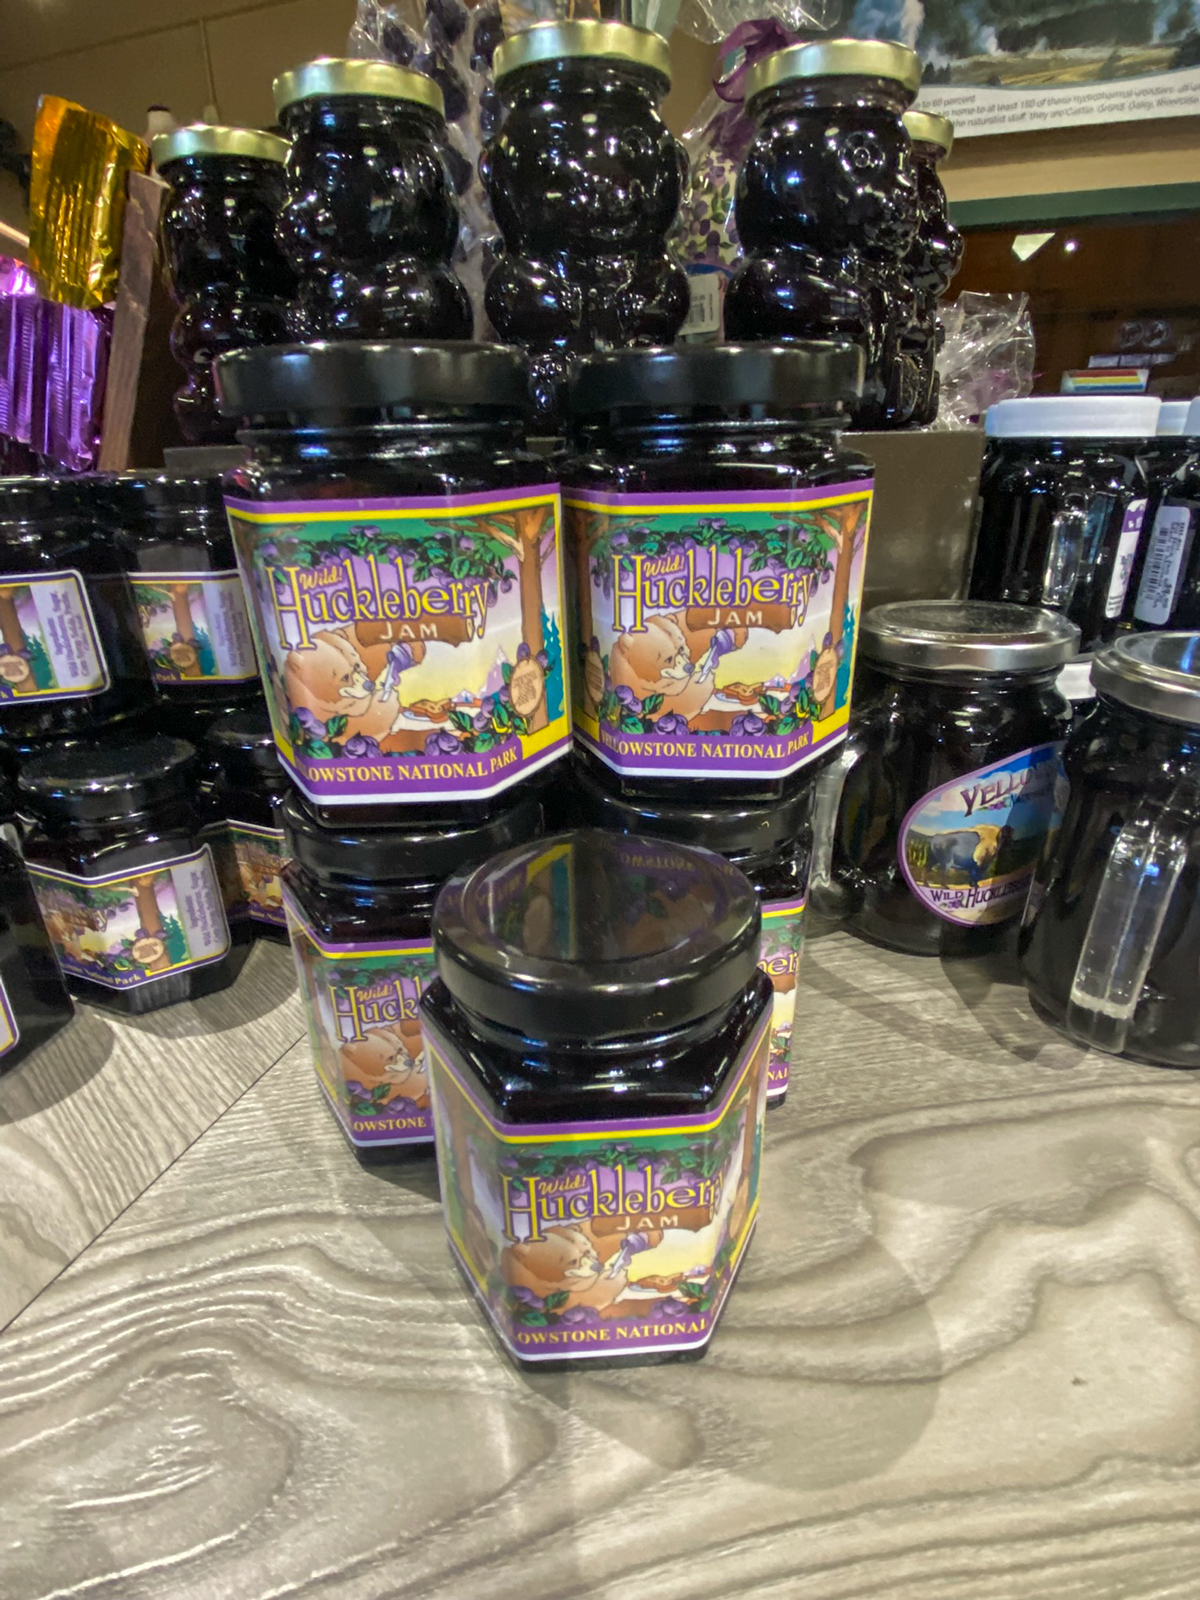 Huckleberry jam and honey at Old Faithful Lodge Gift Shop